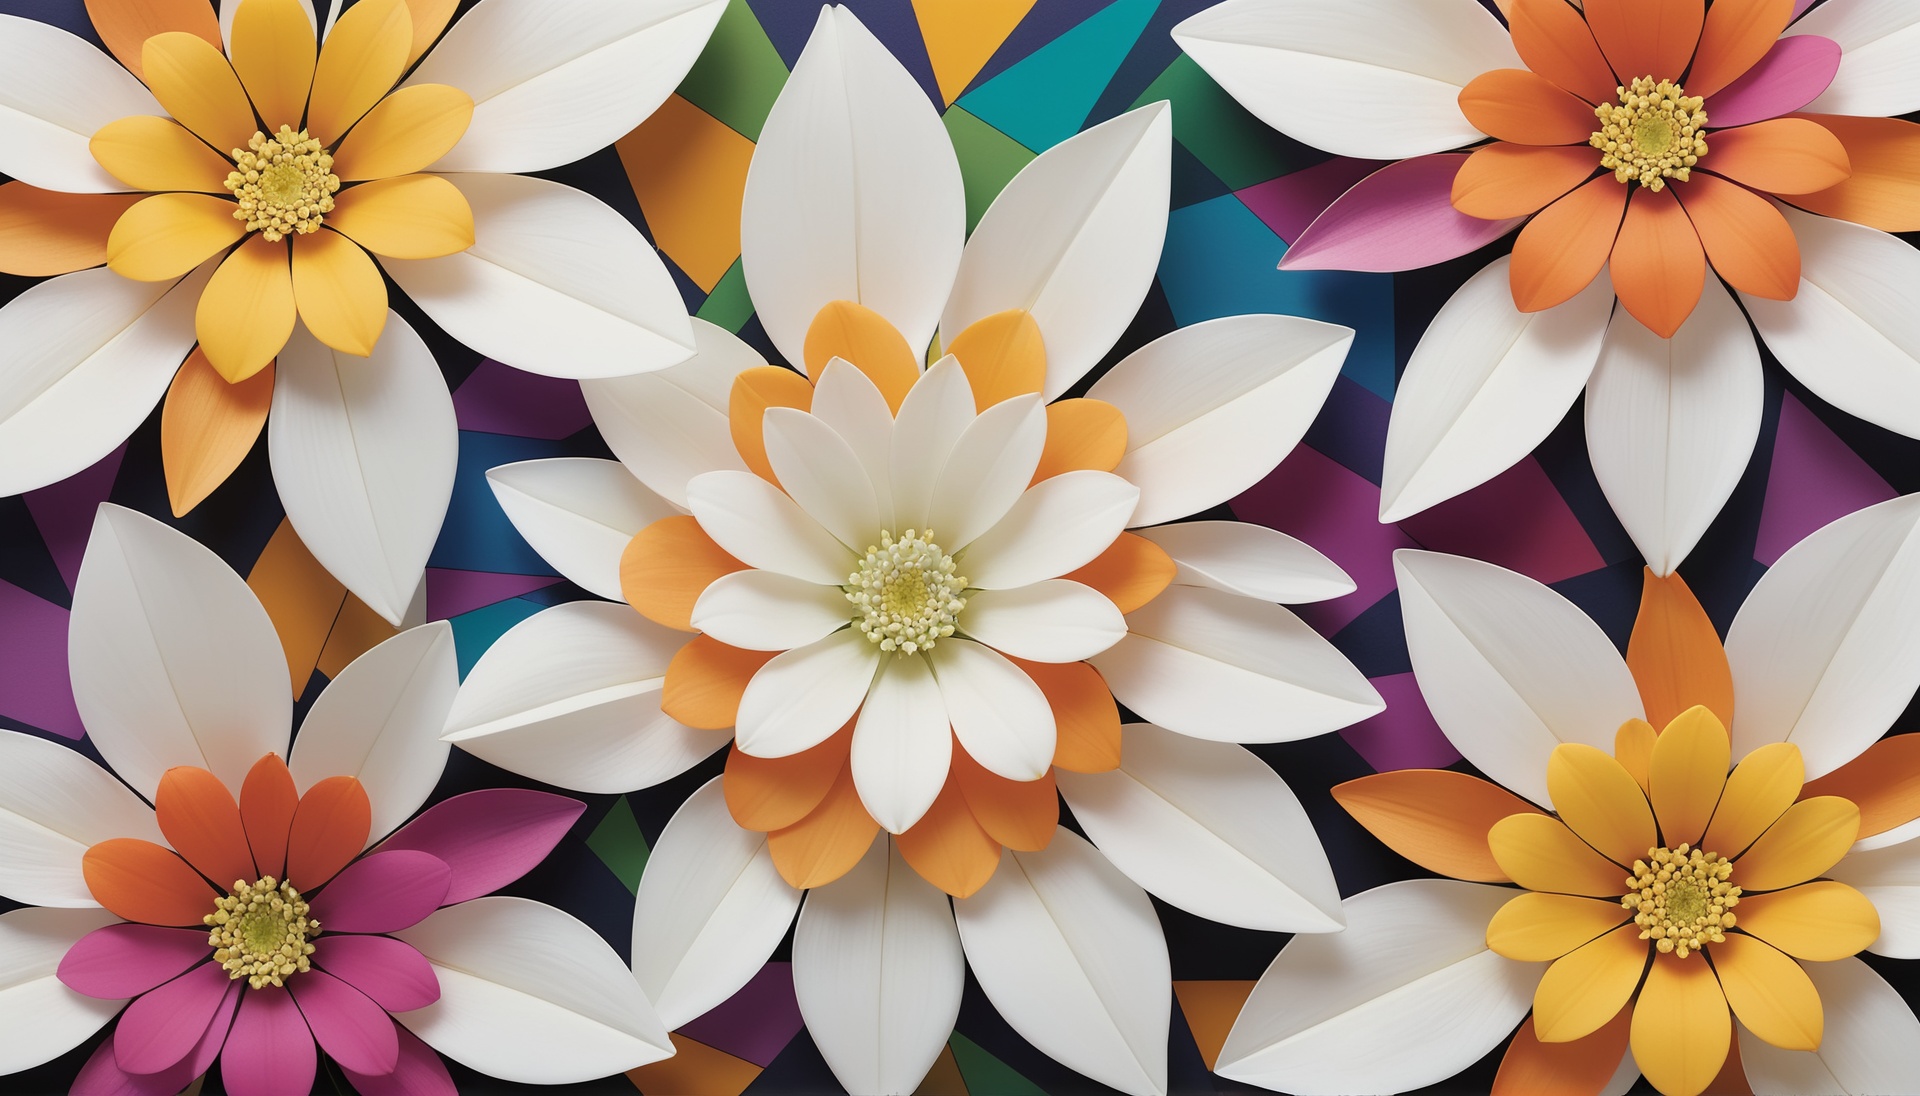 White flowers with colorful geometric designs as petals, background